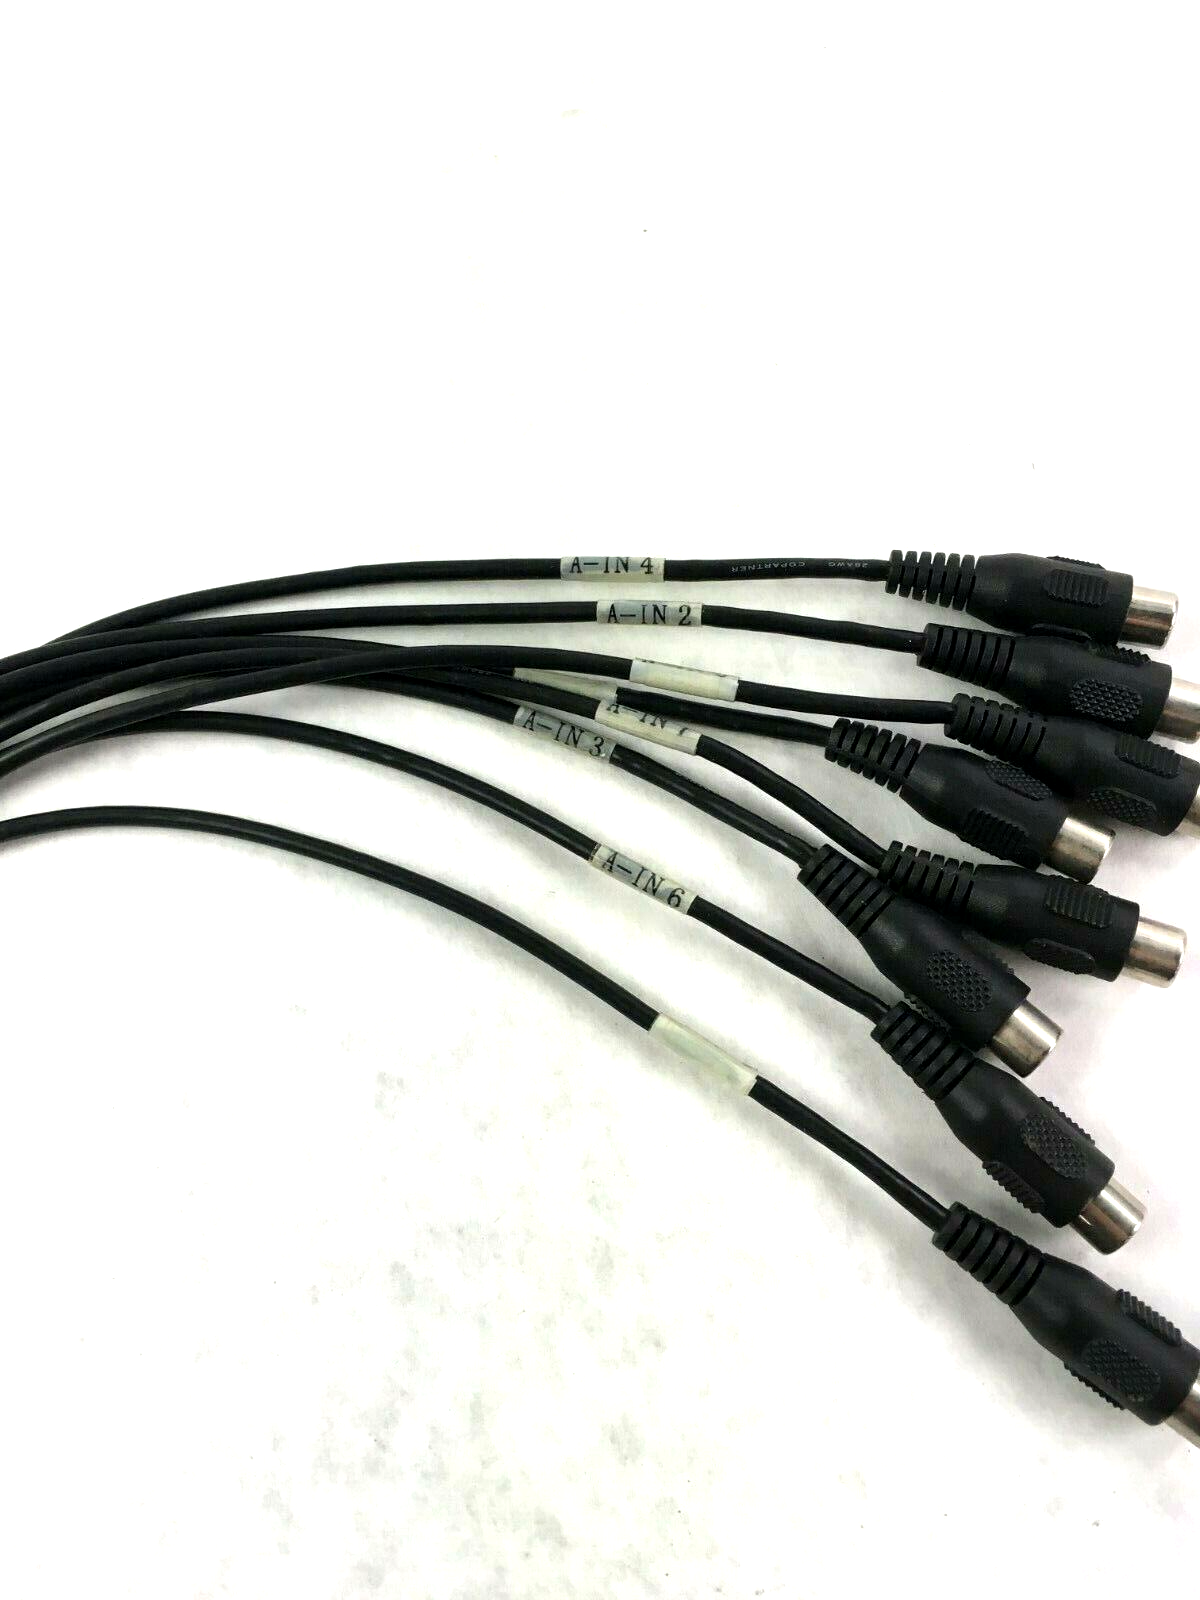 NVT Smatrix Audio Connector Cable, 15-pin DB15 Male to 8-Channel S-Video